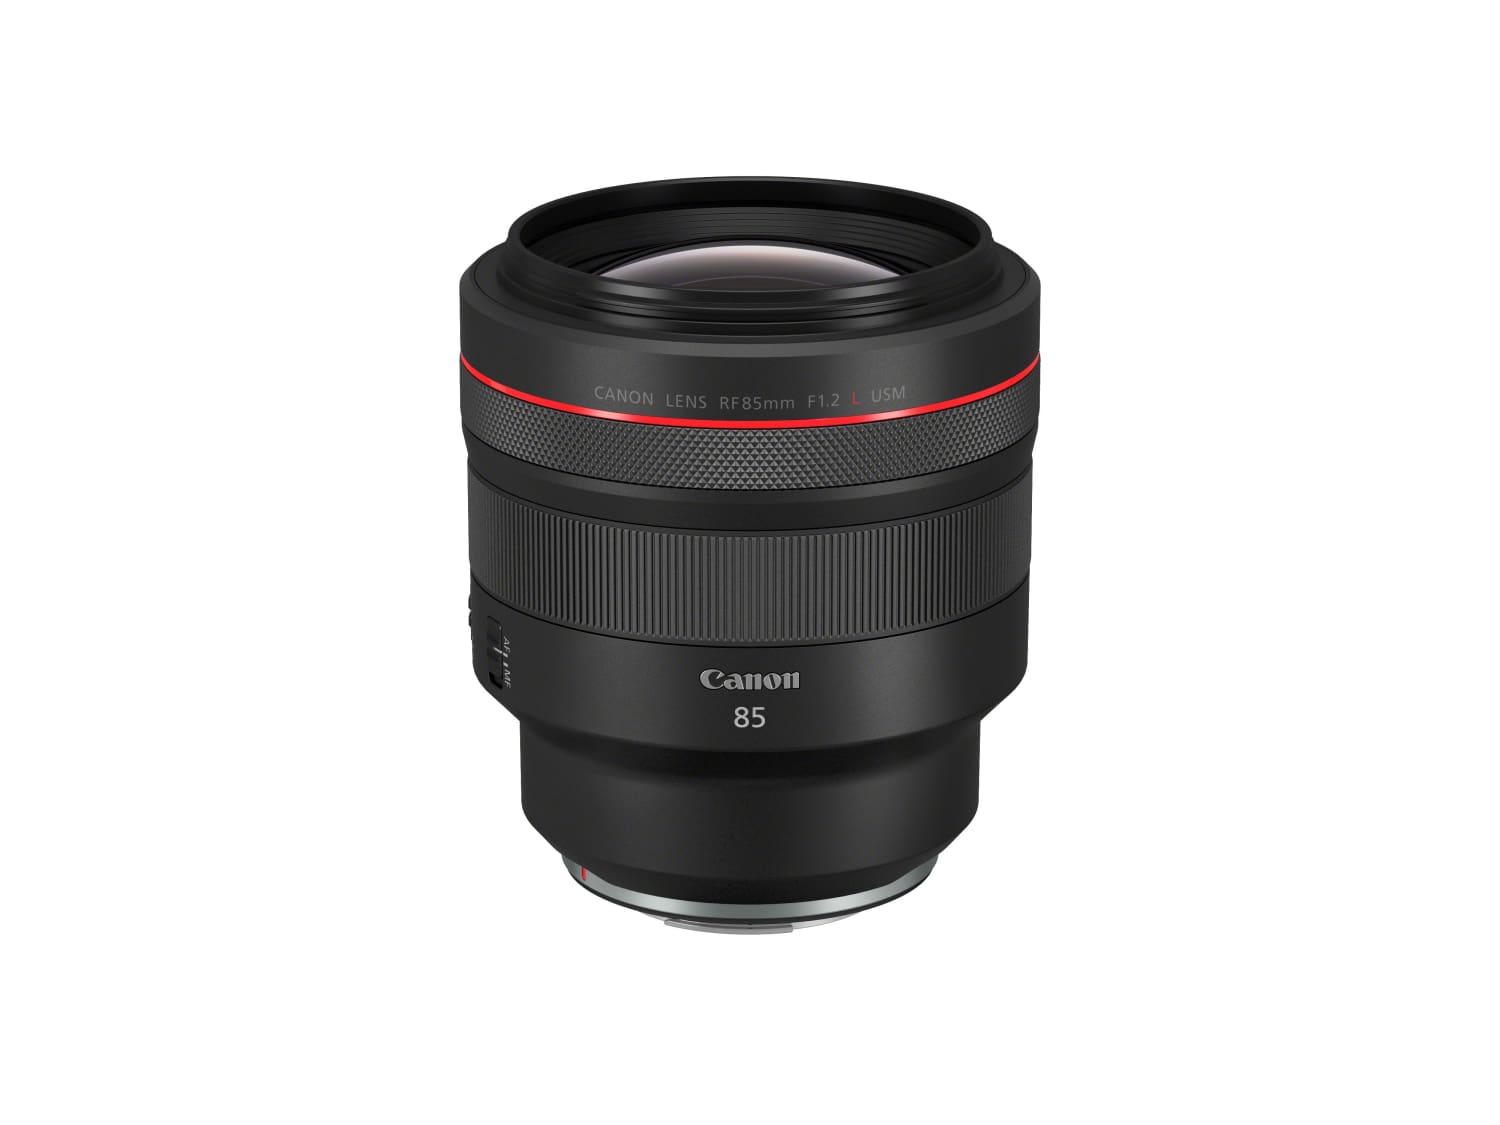 Canon launches an iconic lens for a new generation – the RF 85mm F1.2L USM – offering Canon’s highest resolution yet Cameratek